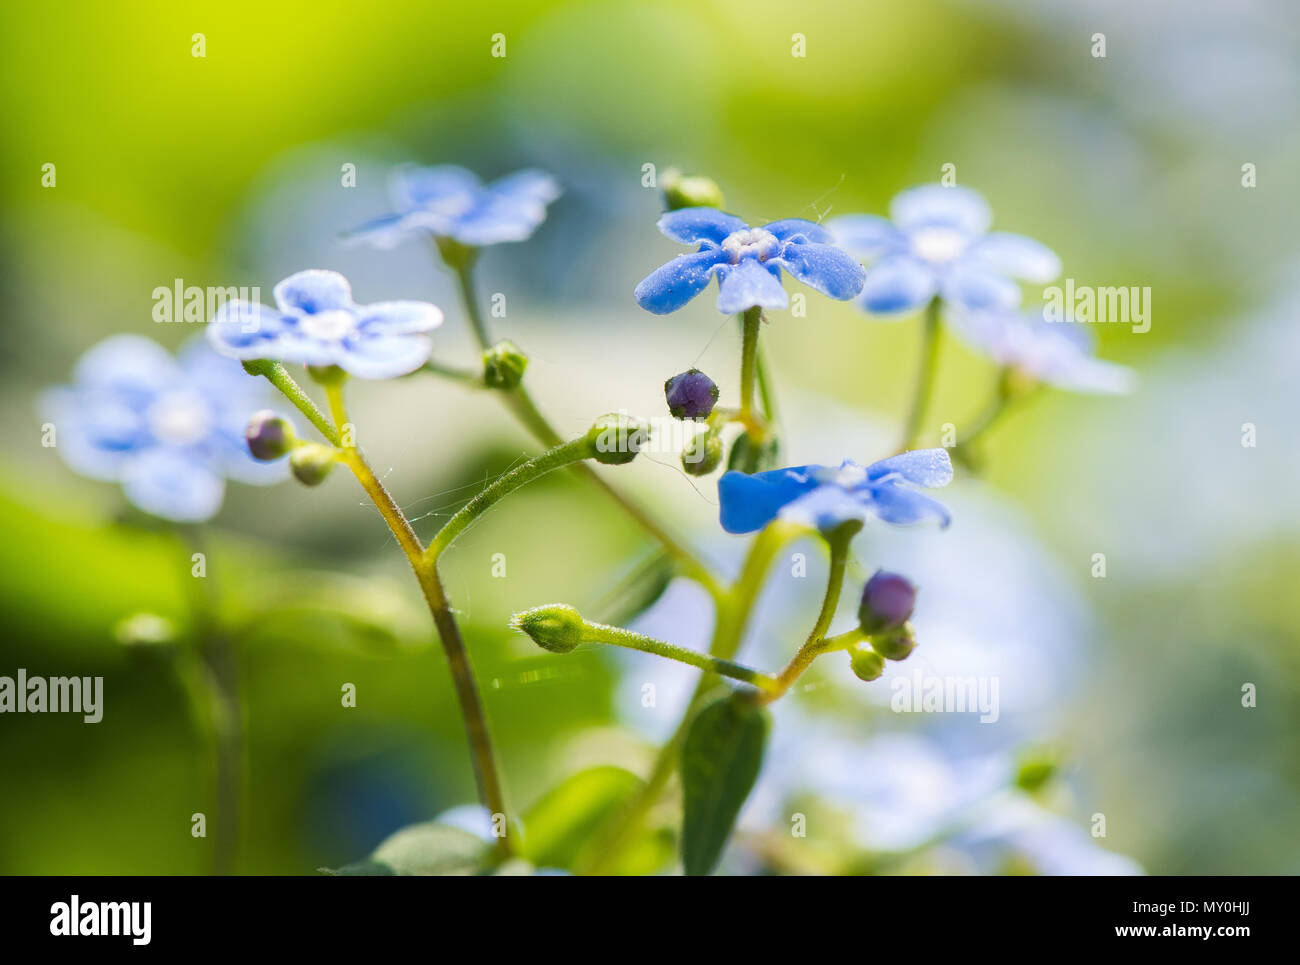 Forget me not, small flowers macro photo Stock Photo